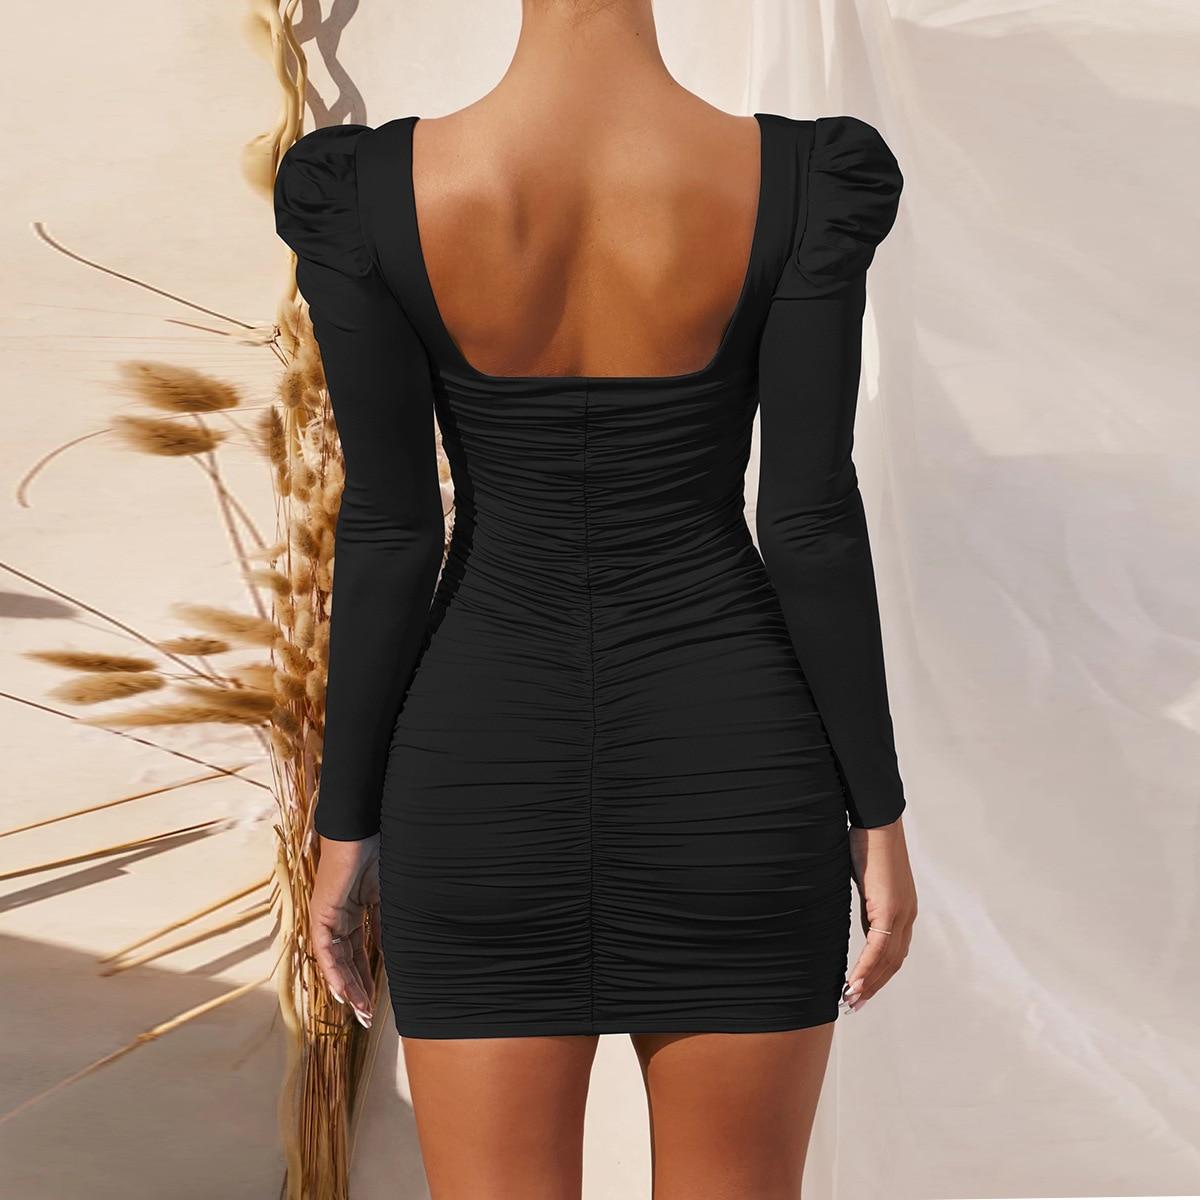 Fashion Spring Long Sleeve Sexy Black Bodycon Dress Women Square Neck vintage Ruched White Mini Party dresses for women 2021